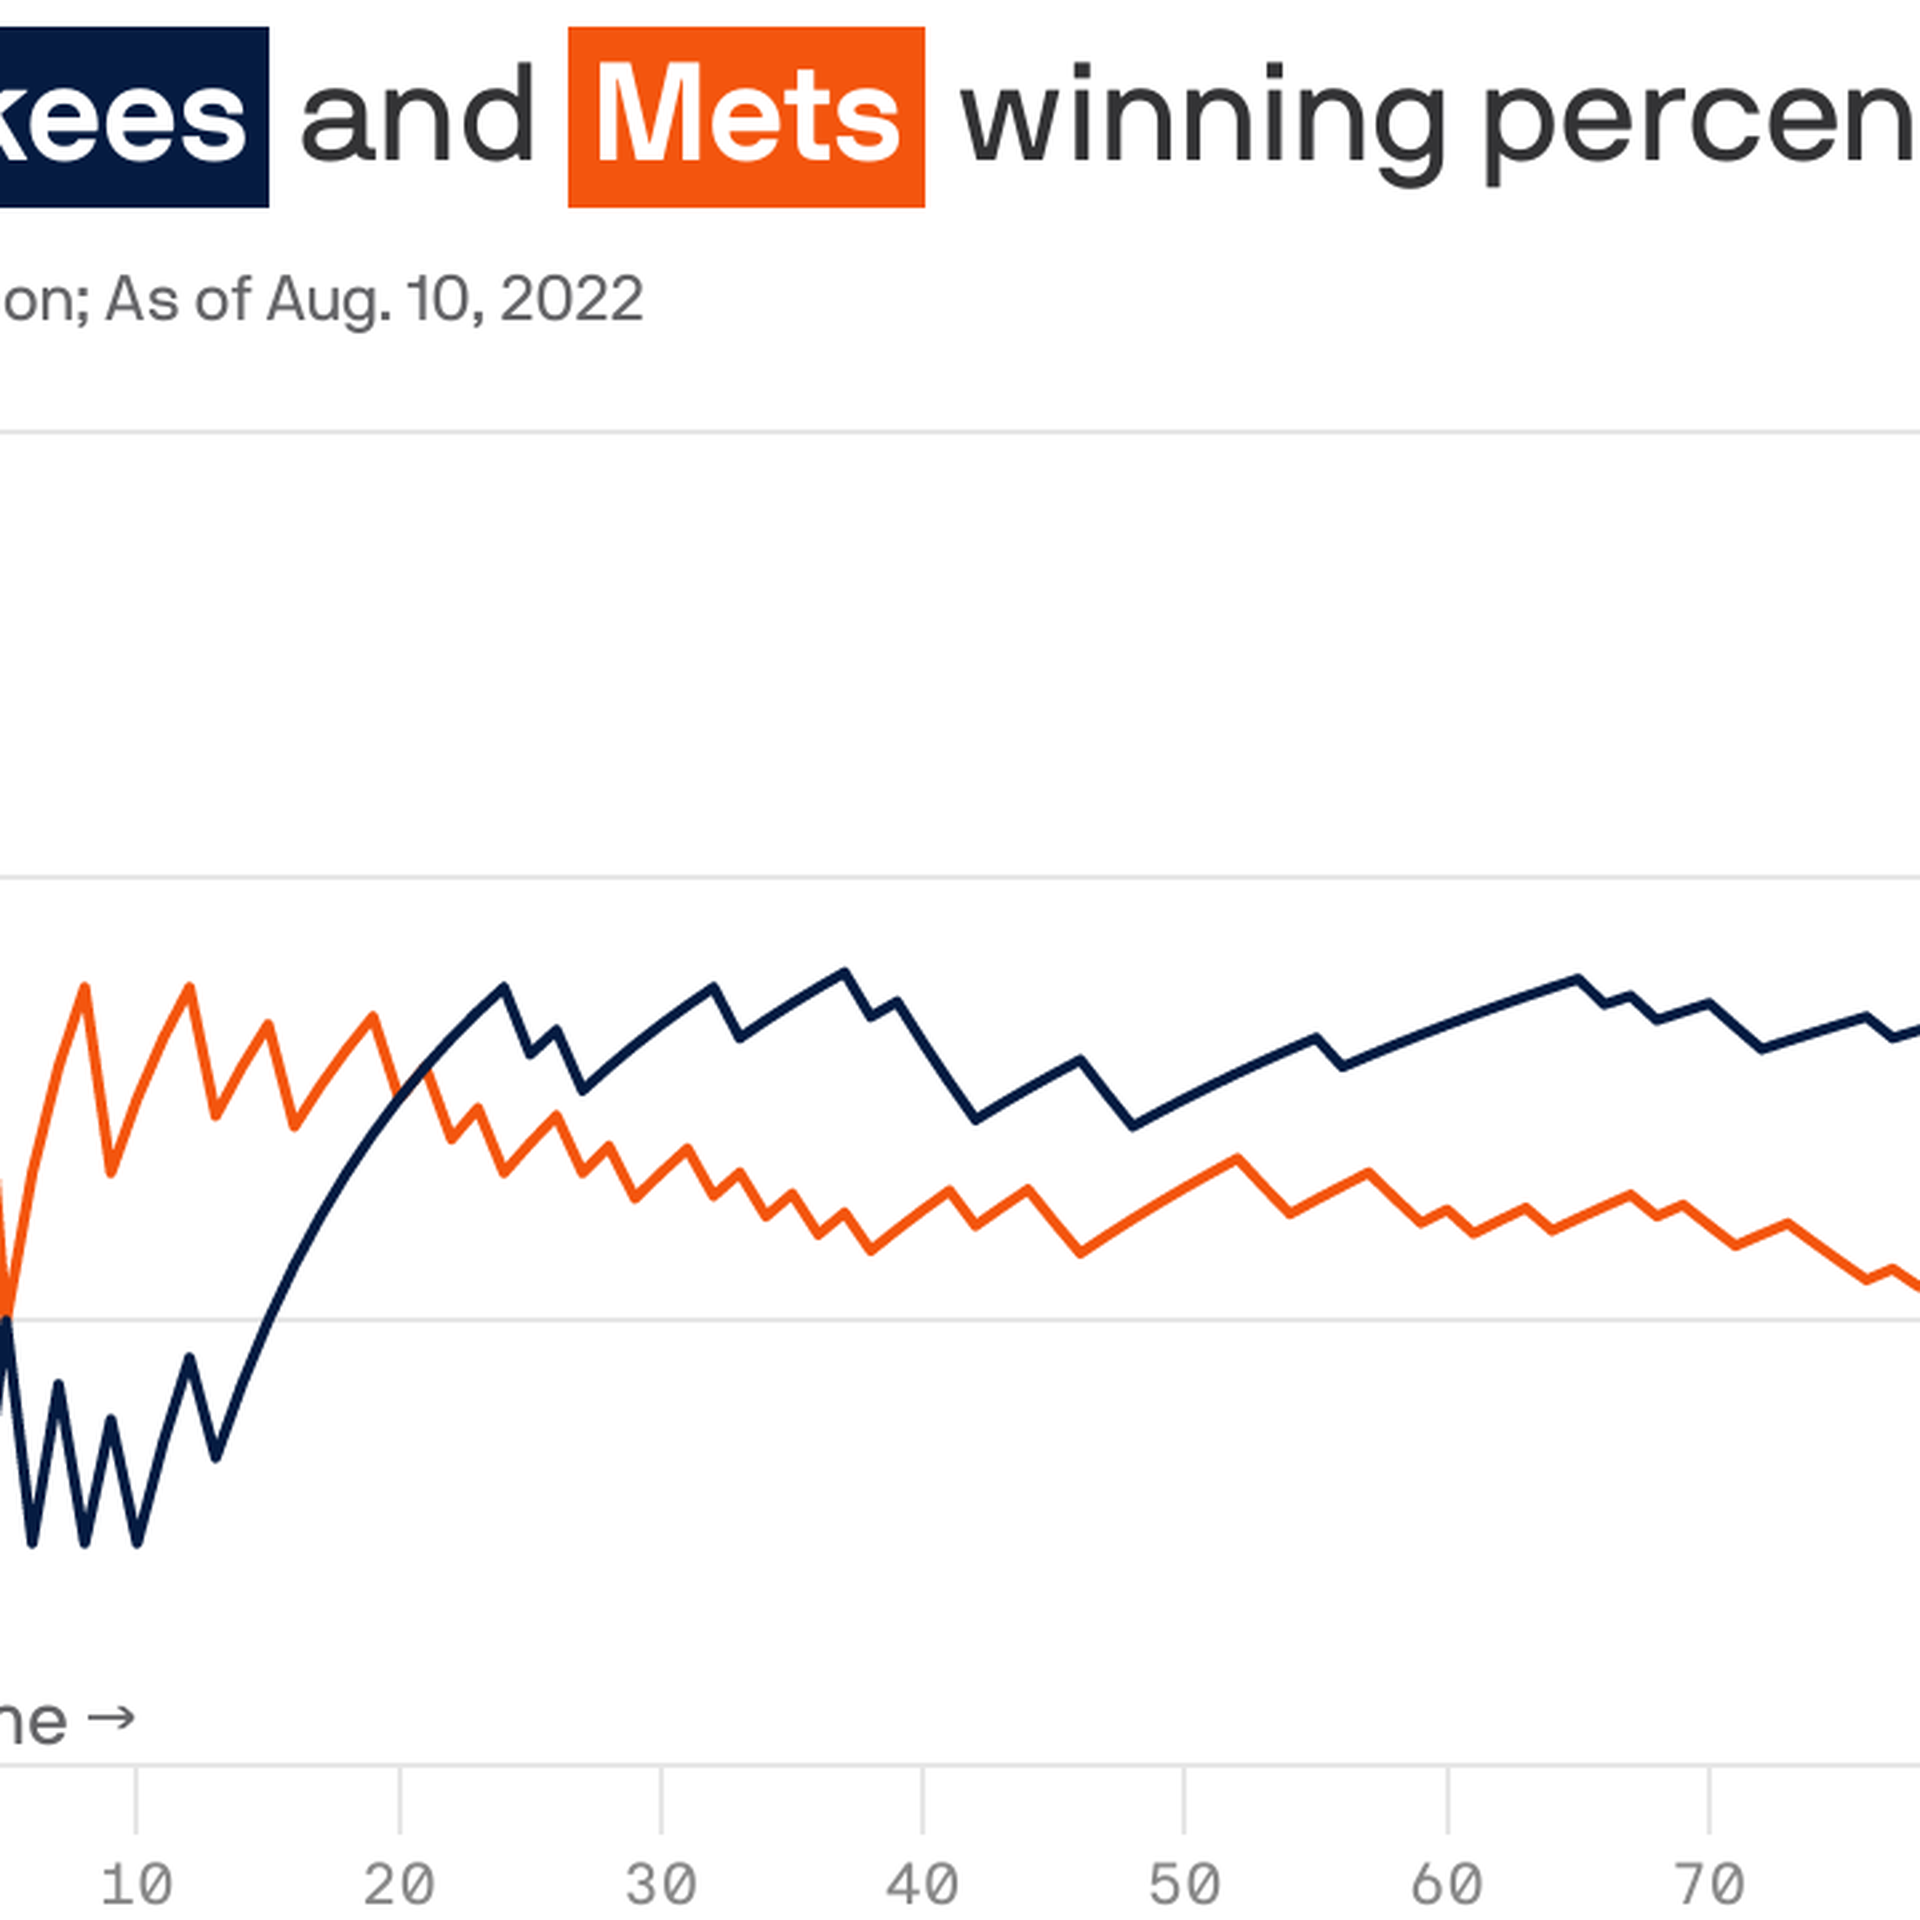 A line chart showing the Yankees and Mets winning percentages for the 2022 season. Since about game 20, the Yankees have led the Mets, but that trend finally reversed on August 10.